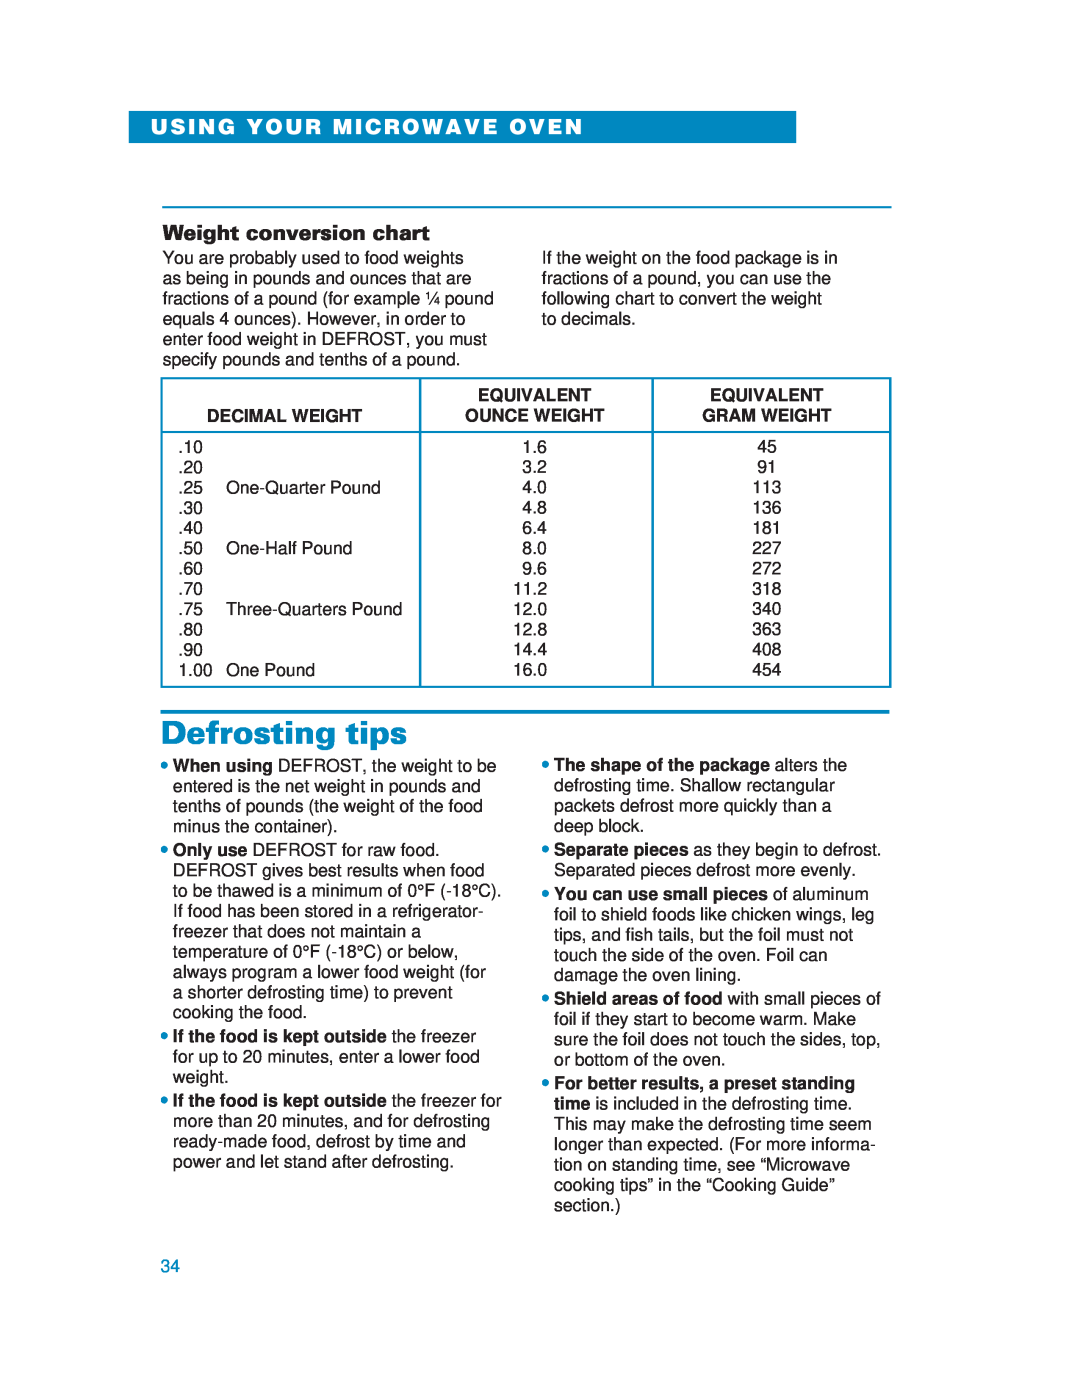 Whirlpool YMH6130XE warranty Defrosting tips, Weight conversion chart, Using Your Microwave Oven 